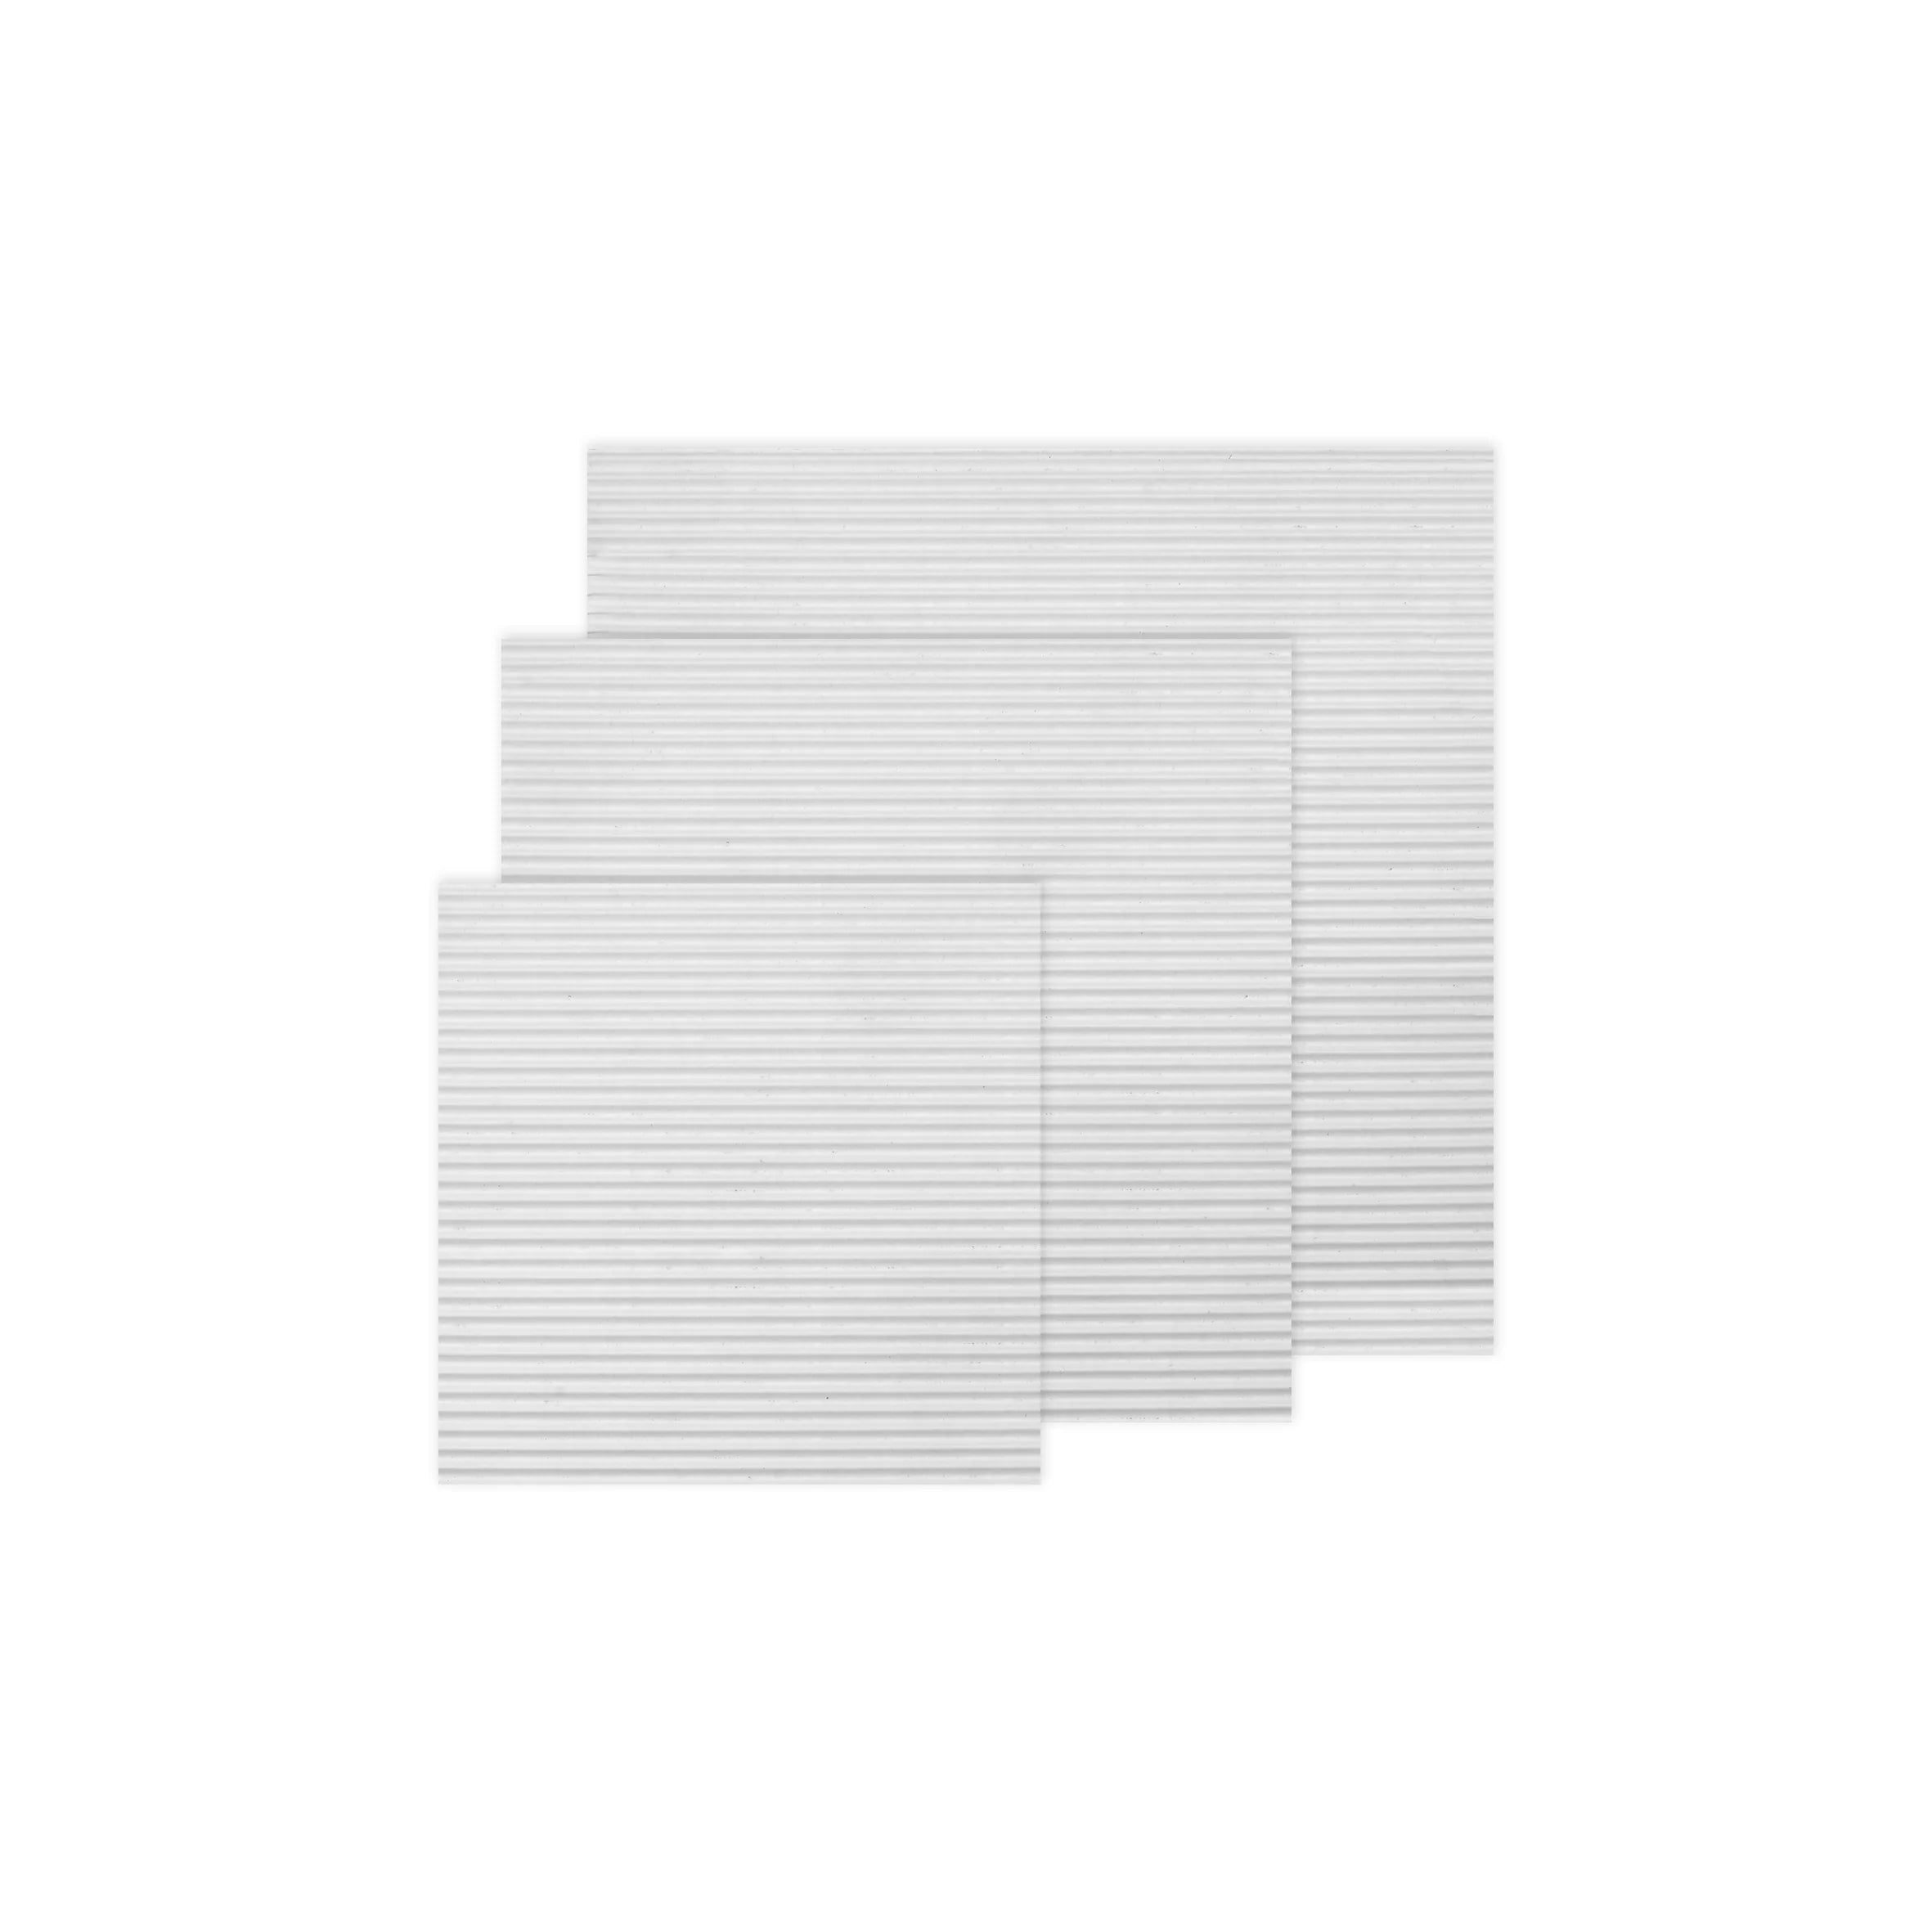 Paper Liner For Pizza Box, Large| 100 pieces - Hotpack Bahrain